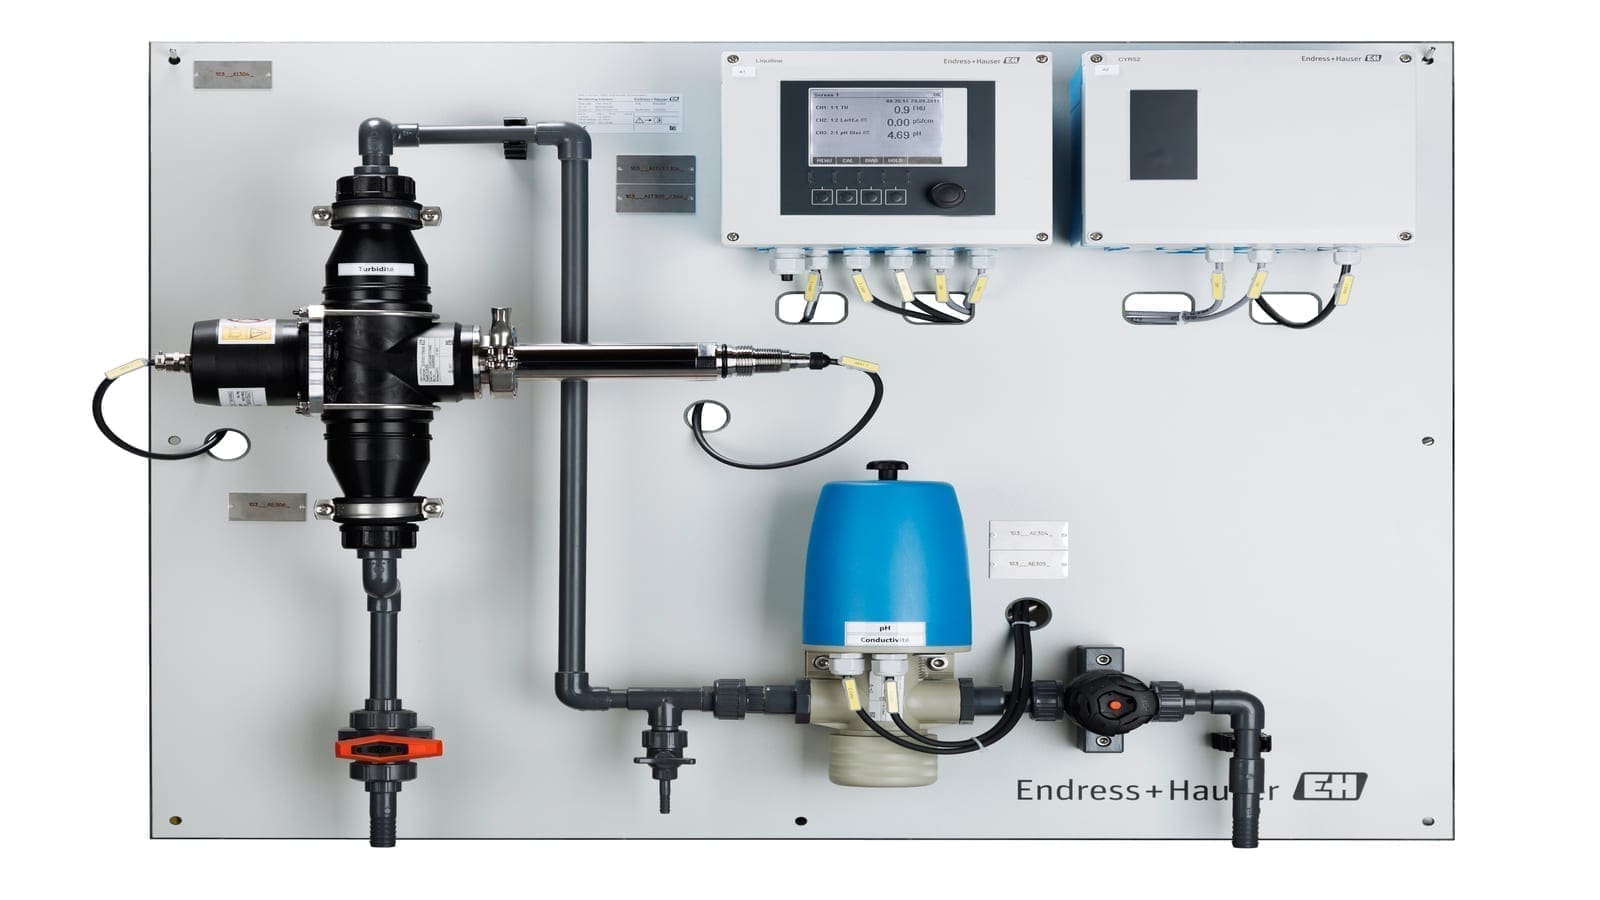 Endress+Hauser introduces ready-to-use water analysis panels heightening water safety